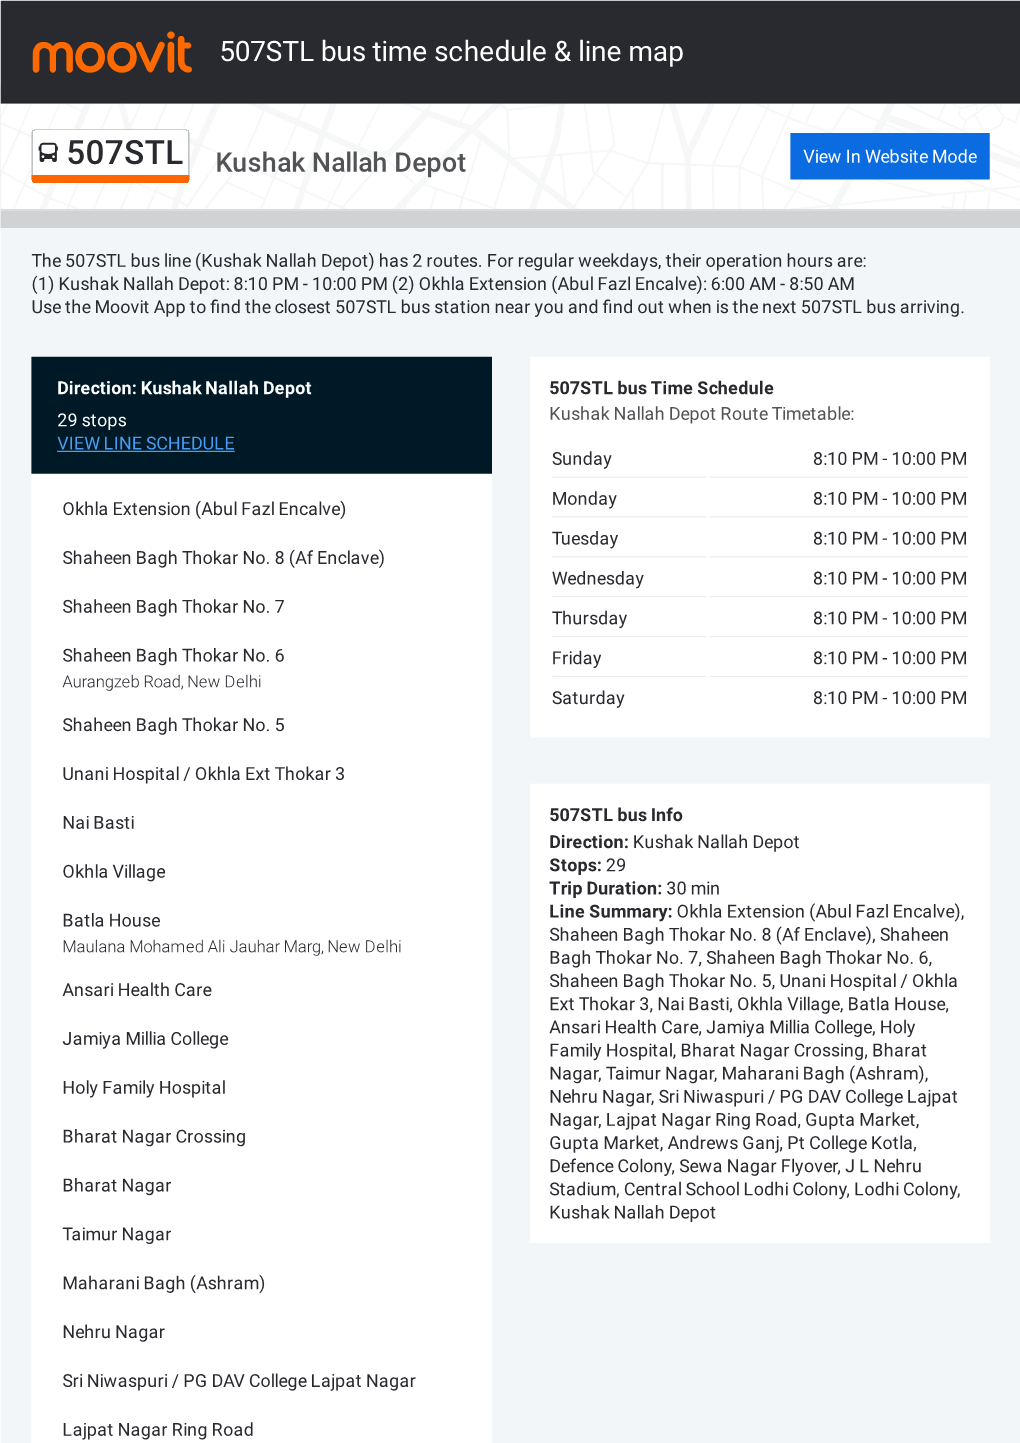 507STL Bus Time Schedule & Line Route